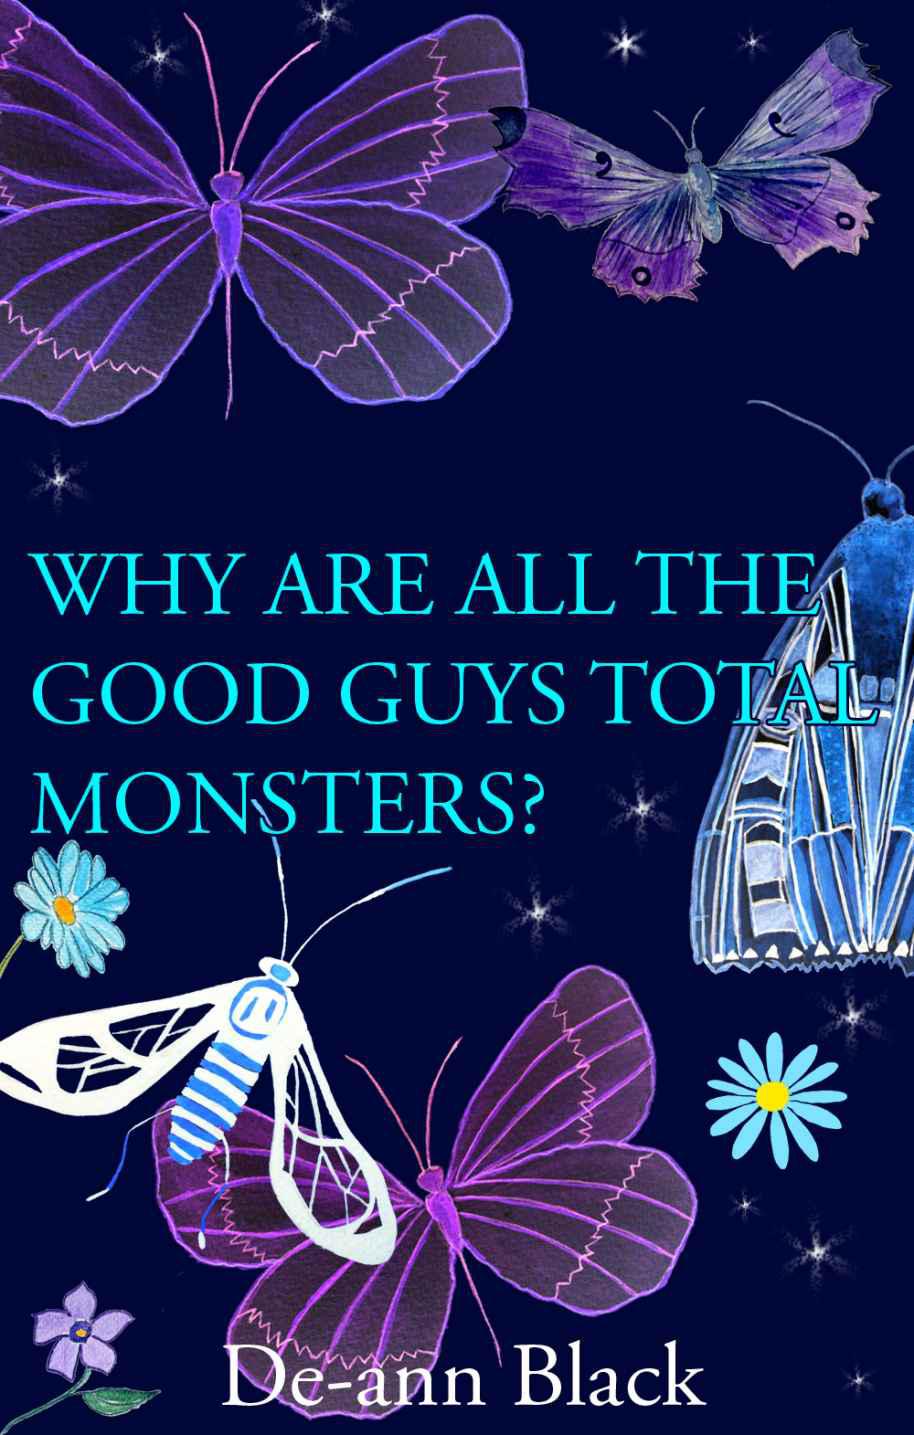 Why Are All the Good Guys Total Monsters? by De-ann Black